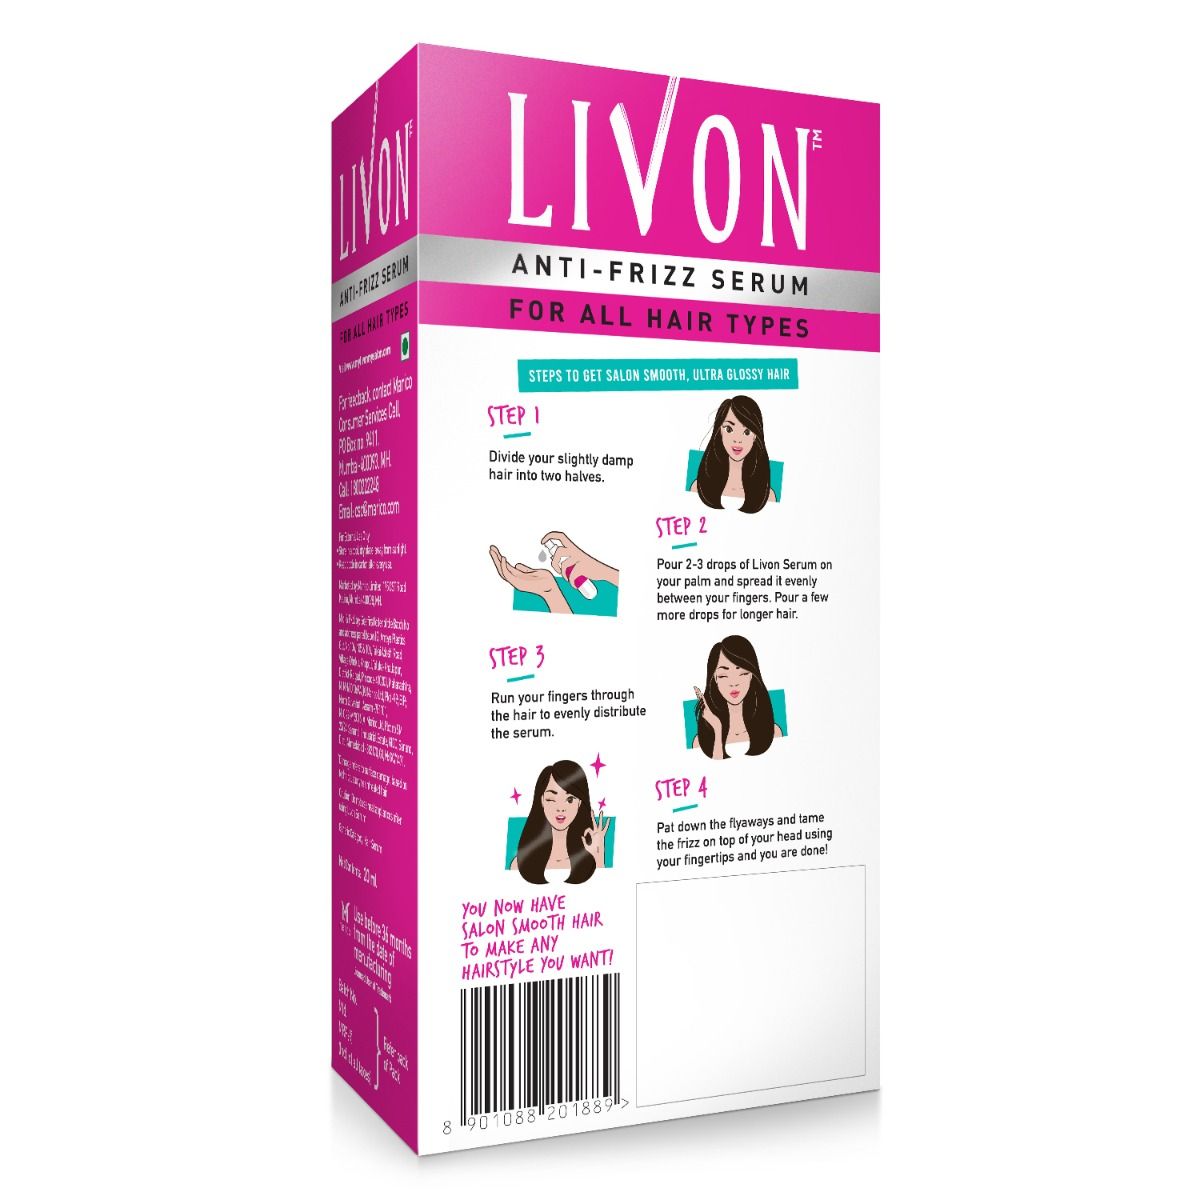 Livon Anti-Frizz Serum For All Hair Types, 20ml Price, Uses, Side Effects,  Composition - Apollo Pharmacy